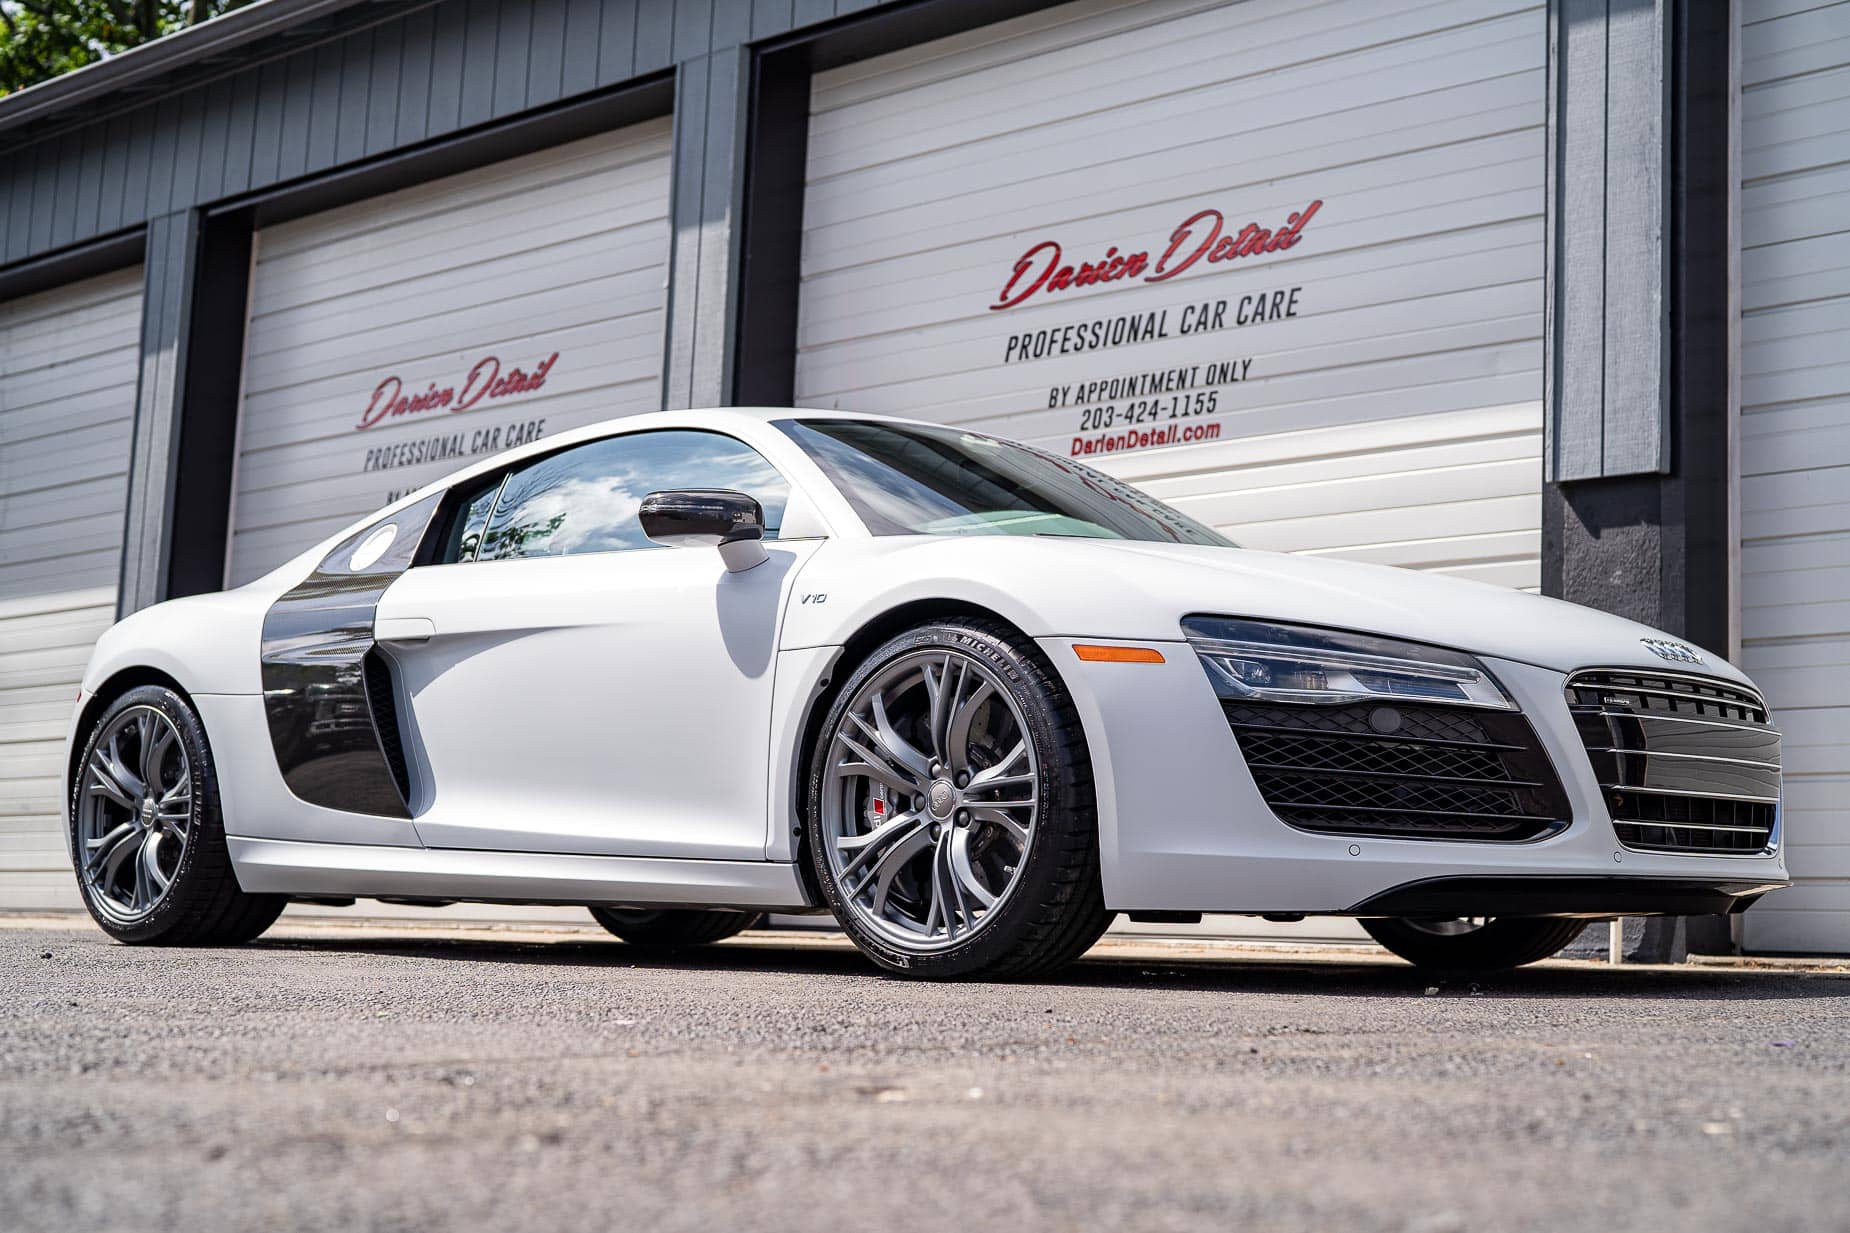 2015 Audi R8 V10 Coupe Matte Suzuka Grey Audi Exclusive Color And Wheels Xpel Paint Protection Film Ppf Ceramic Coating 06